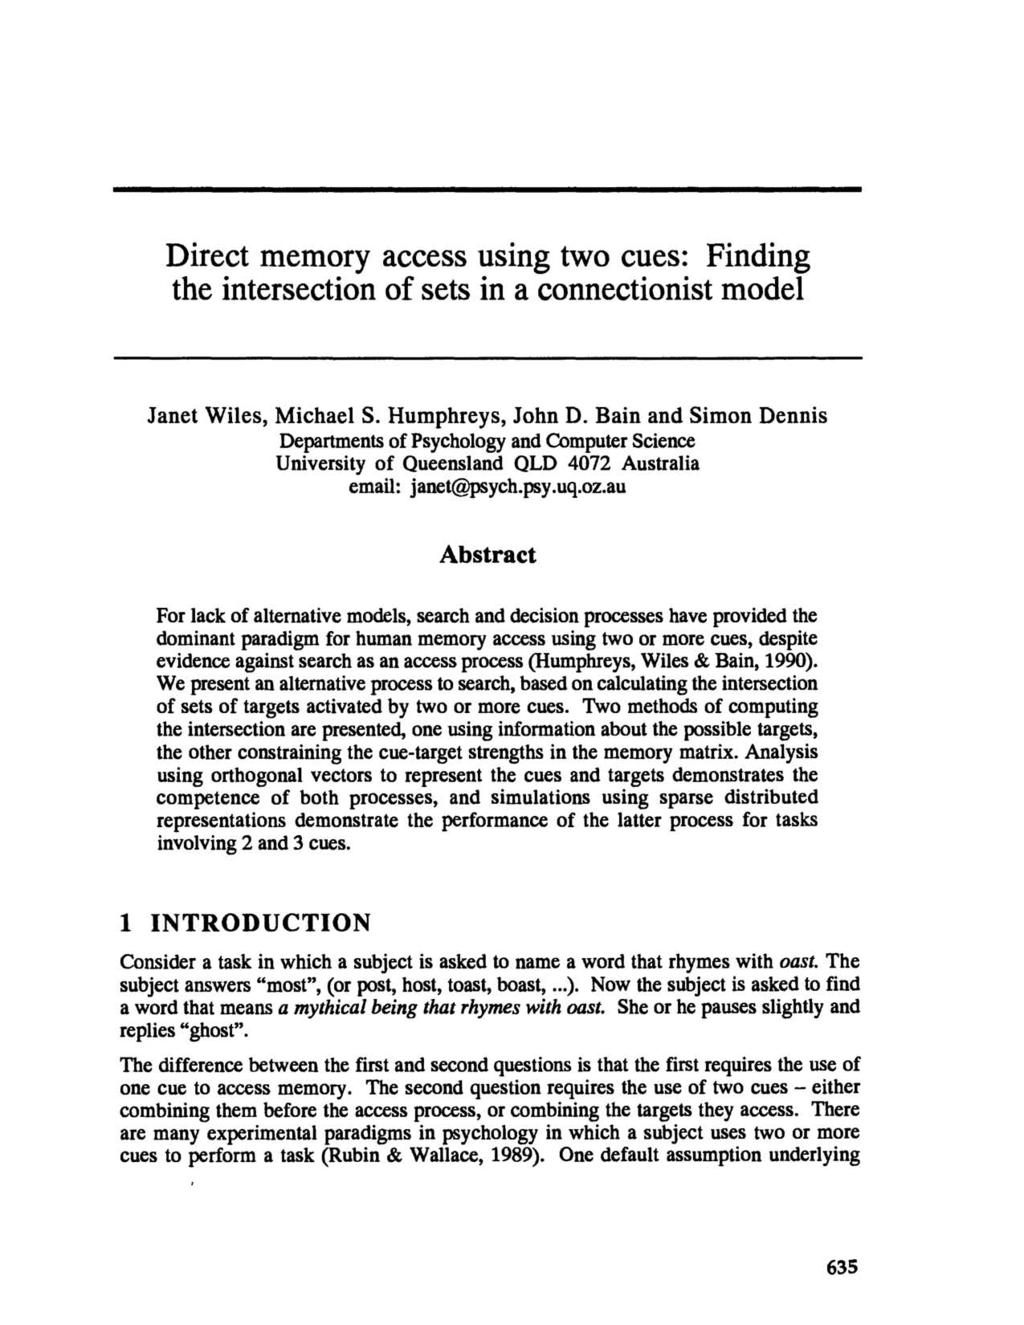 Direct memory access using two cues: Finding the intersection of sets in a connectionist model Janet Wiles, Michael S. Humphreys, John D.